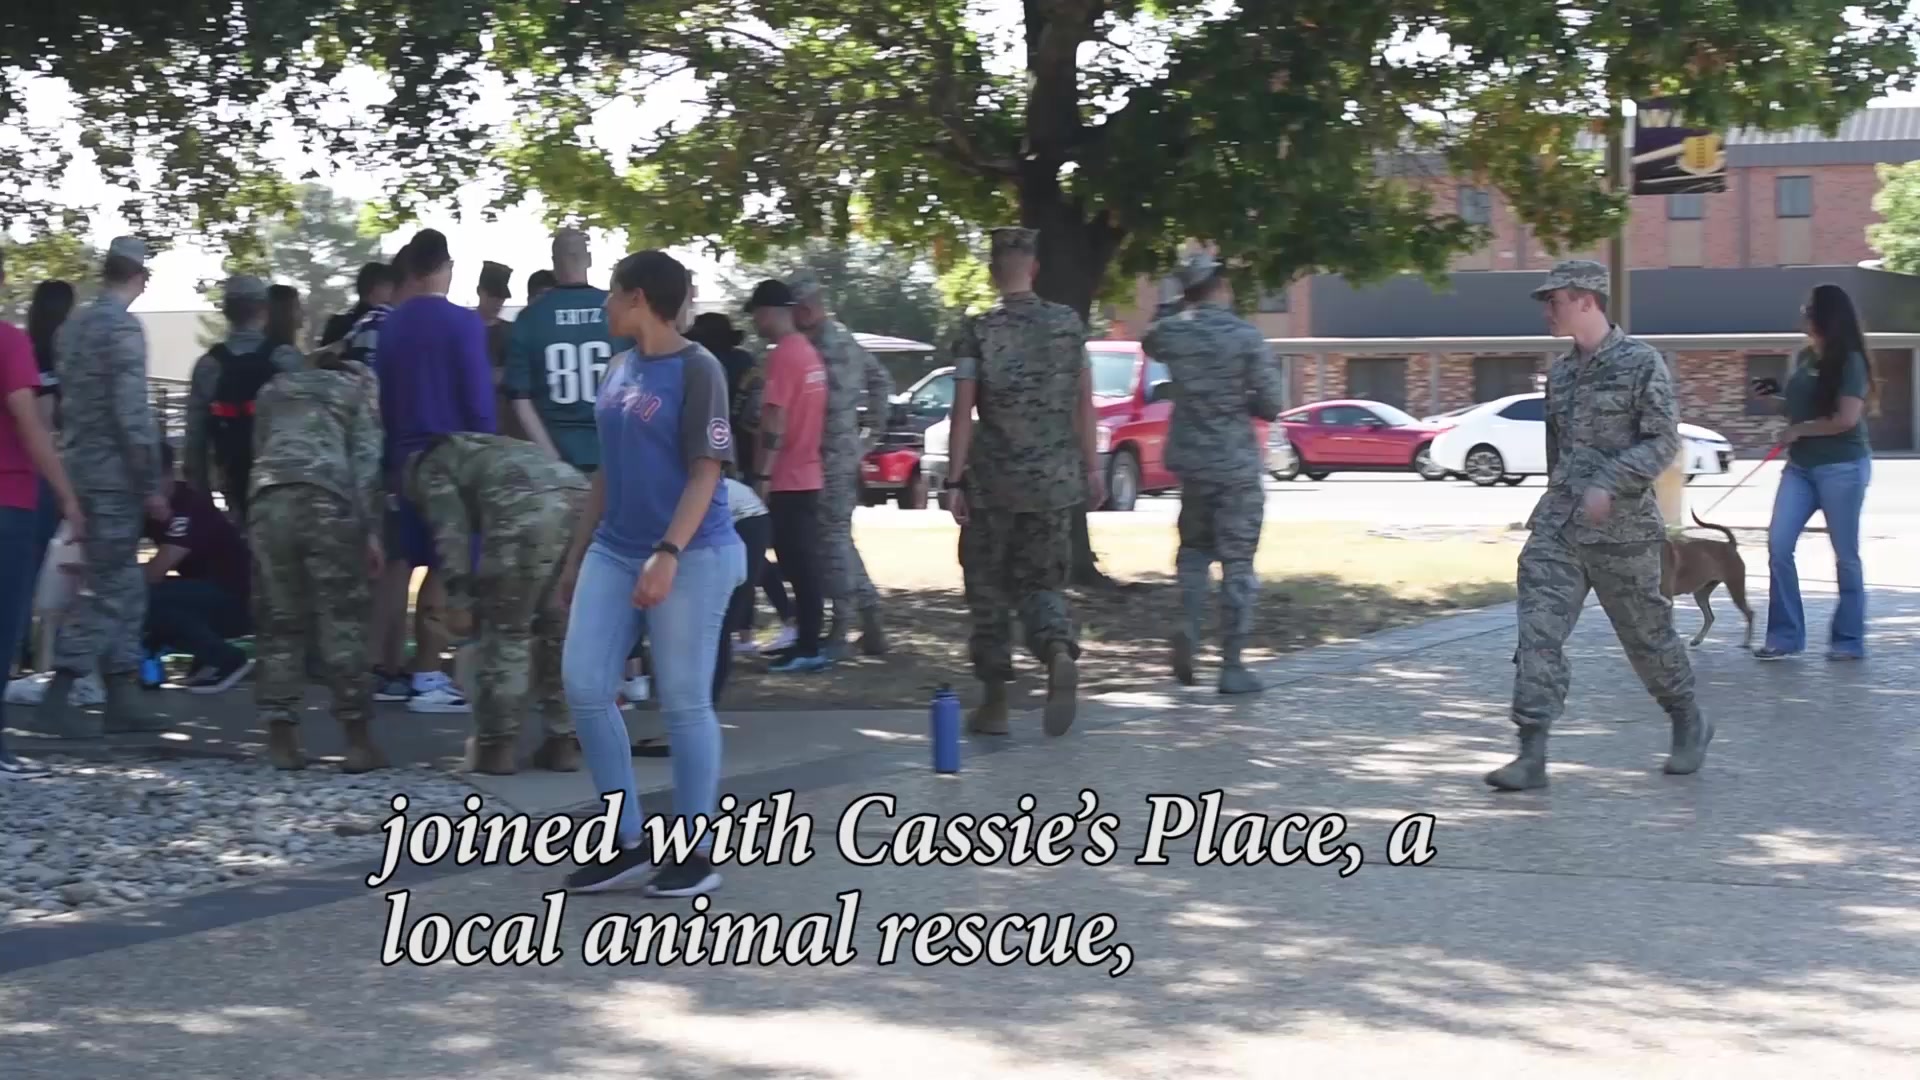 Members of the 17th Training Wing had the opportunity to interact with four-legged furry friends during lunch.